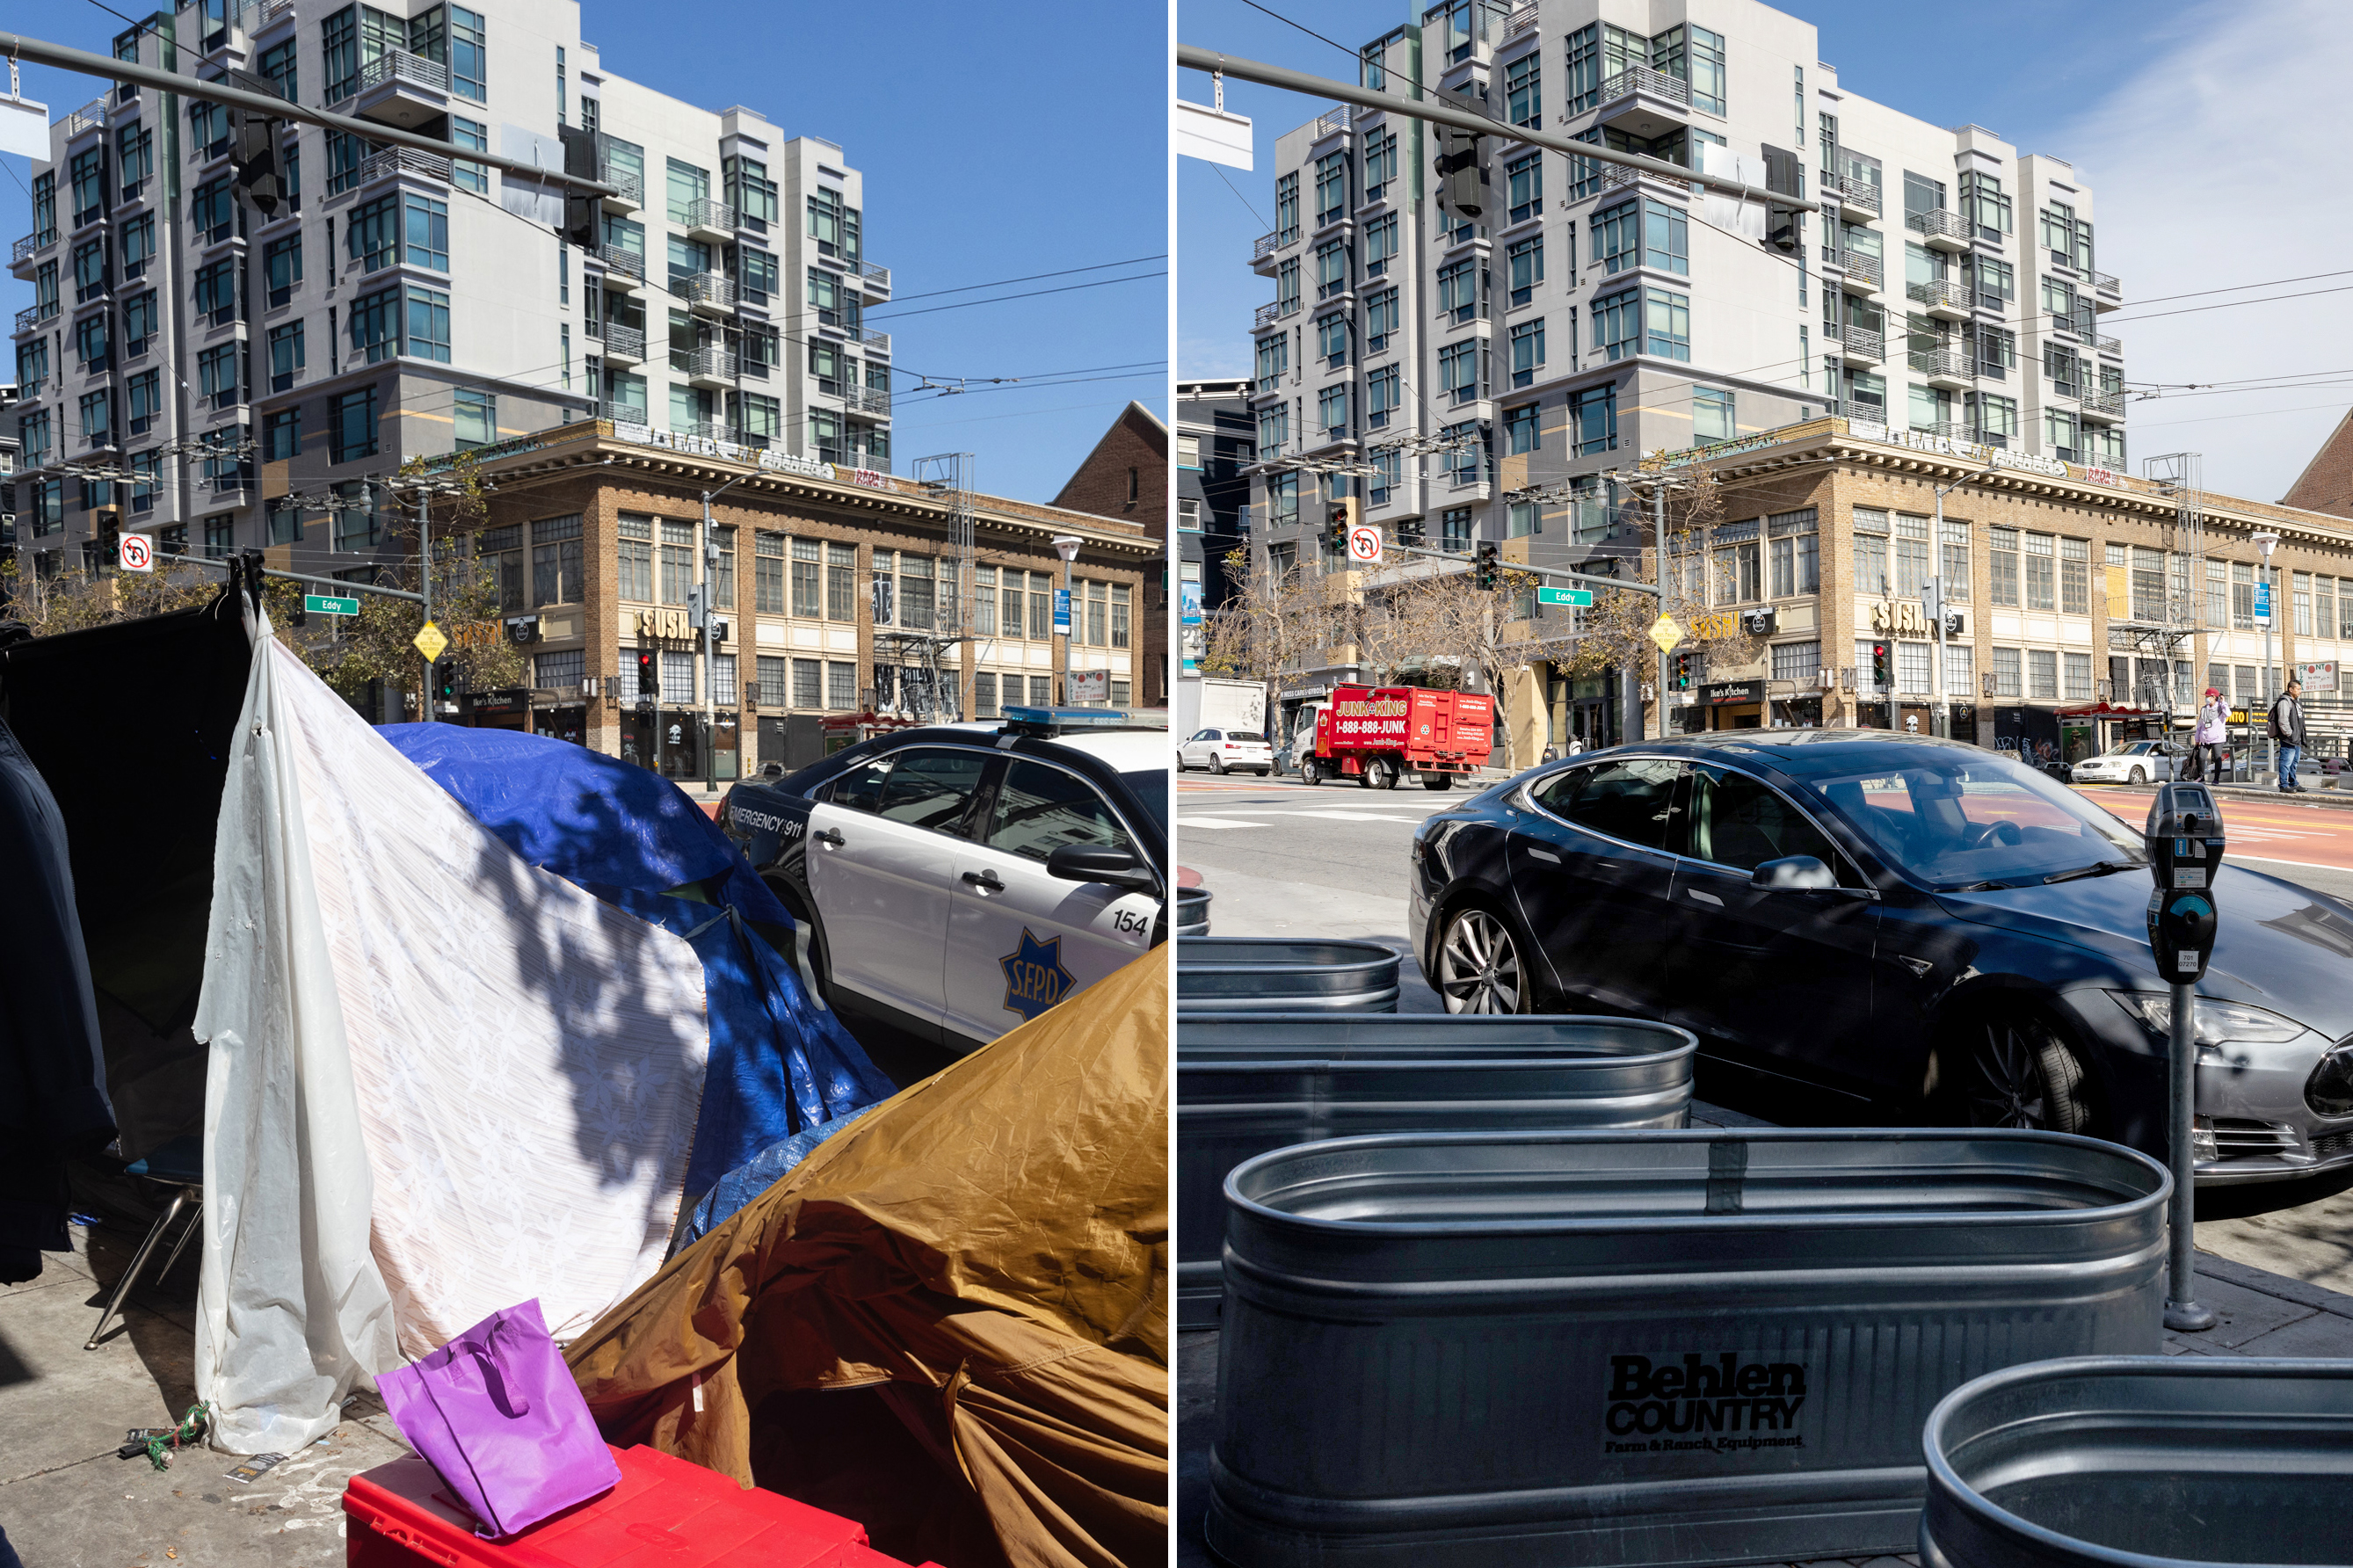 A side by side photo with of a SFPD vehicle parked next to a homeless encampment on a sidewalk in San Francisco with tall buildings in the background on the right and the same location with oblong planter boxes installed to discourage encampments.